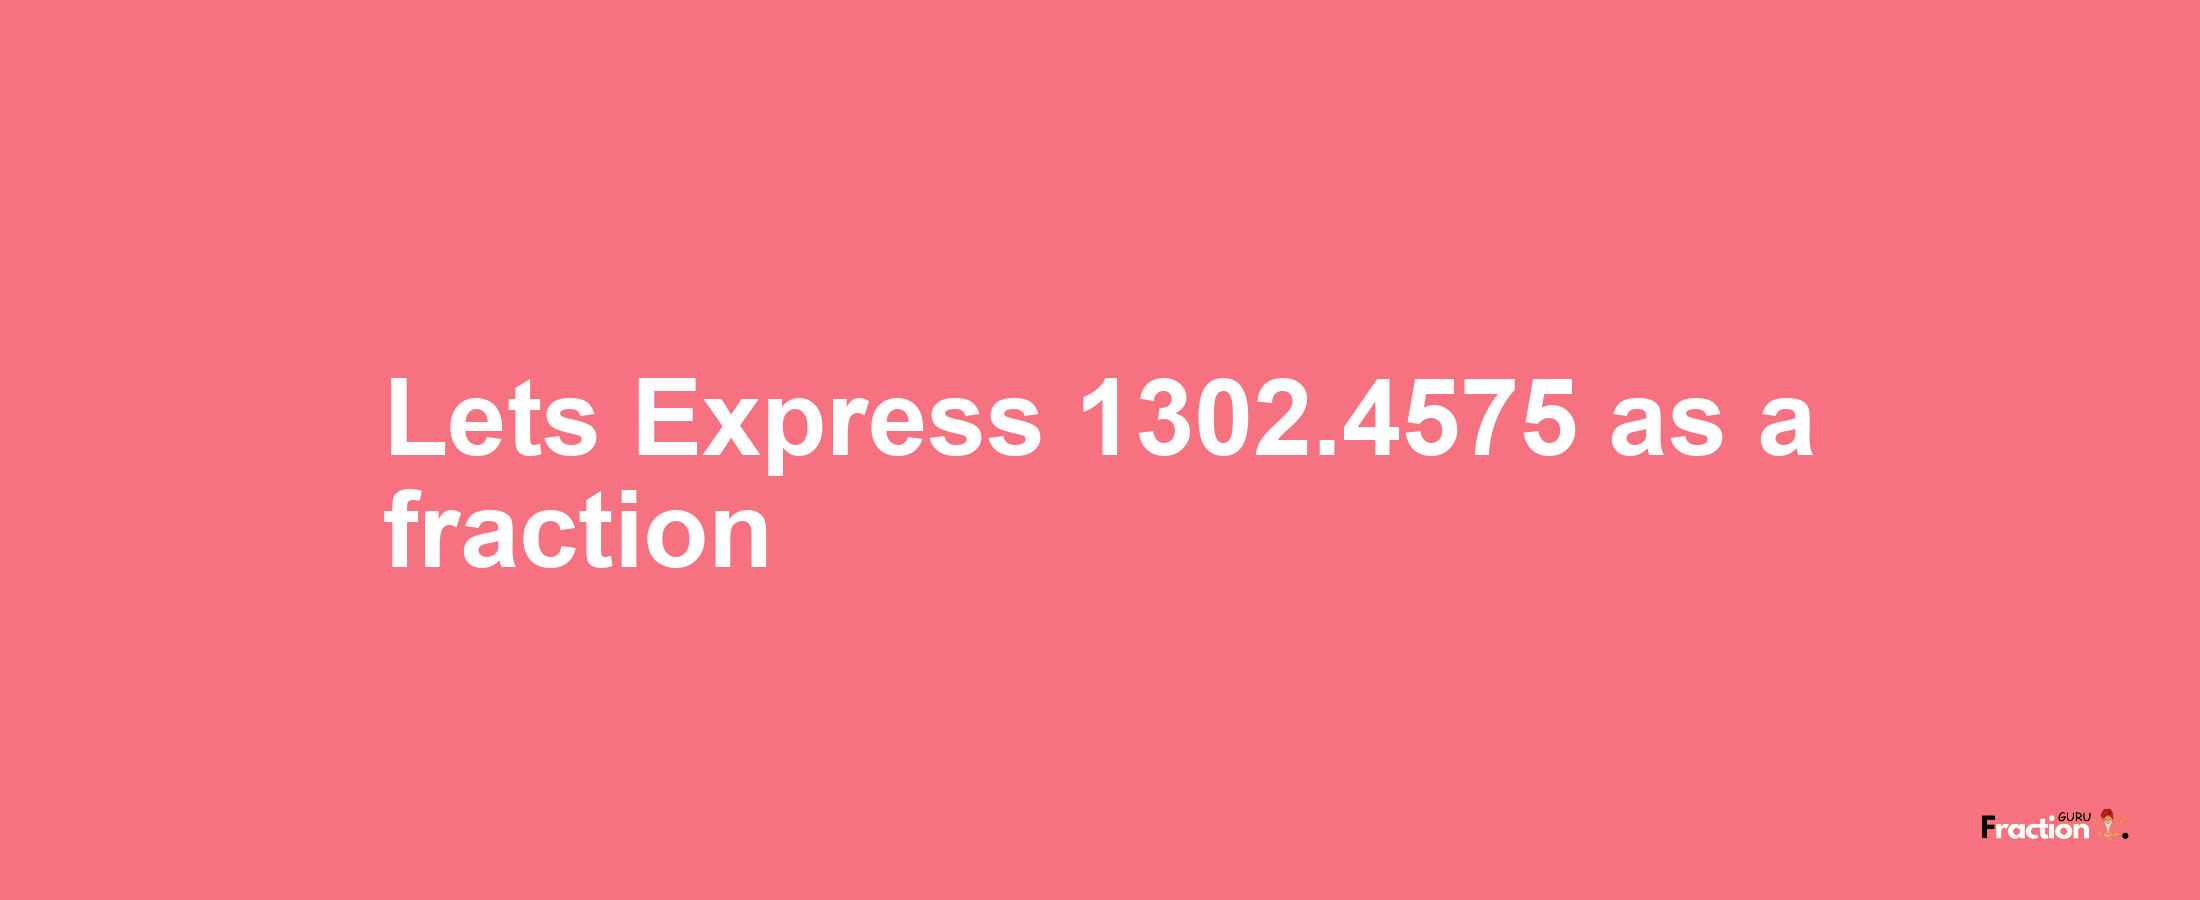 Lets Express 1302.4575 as afraction